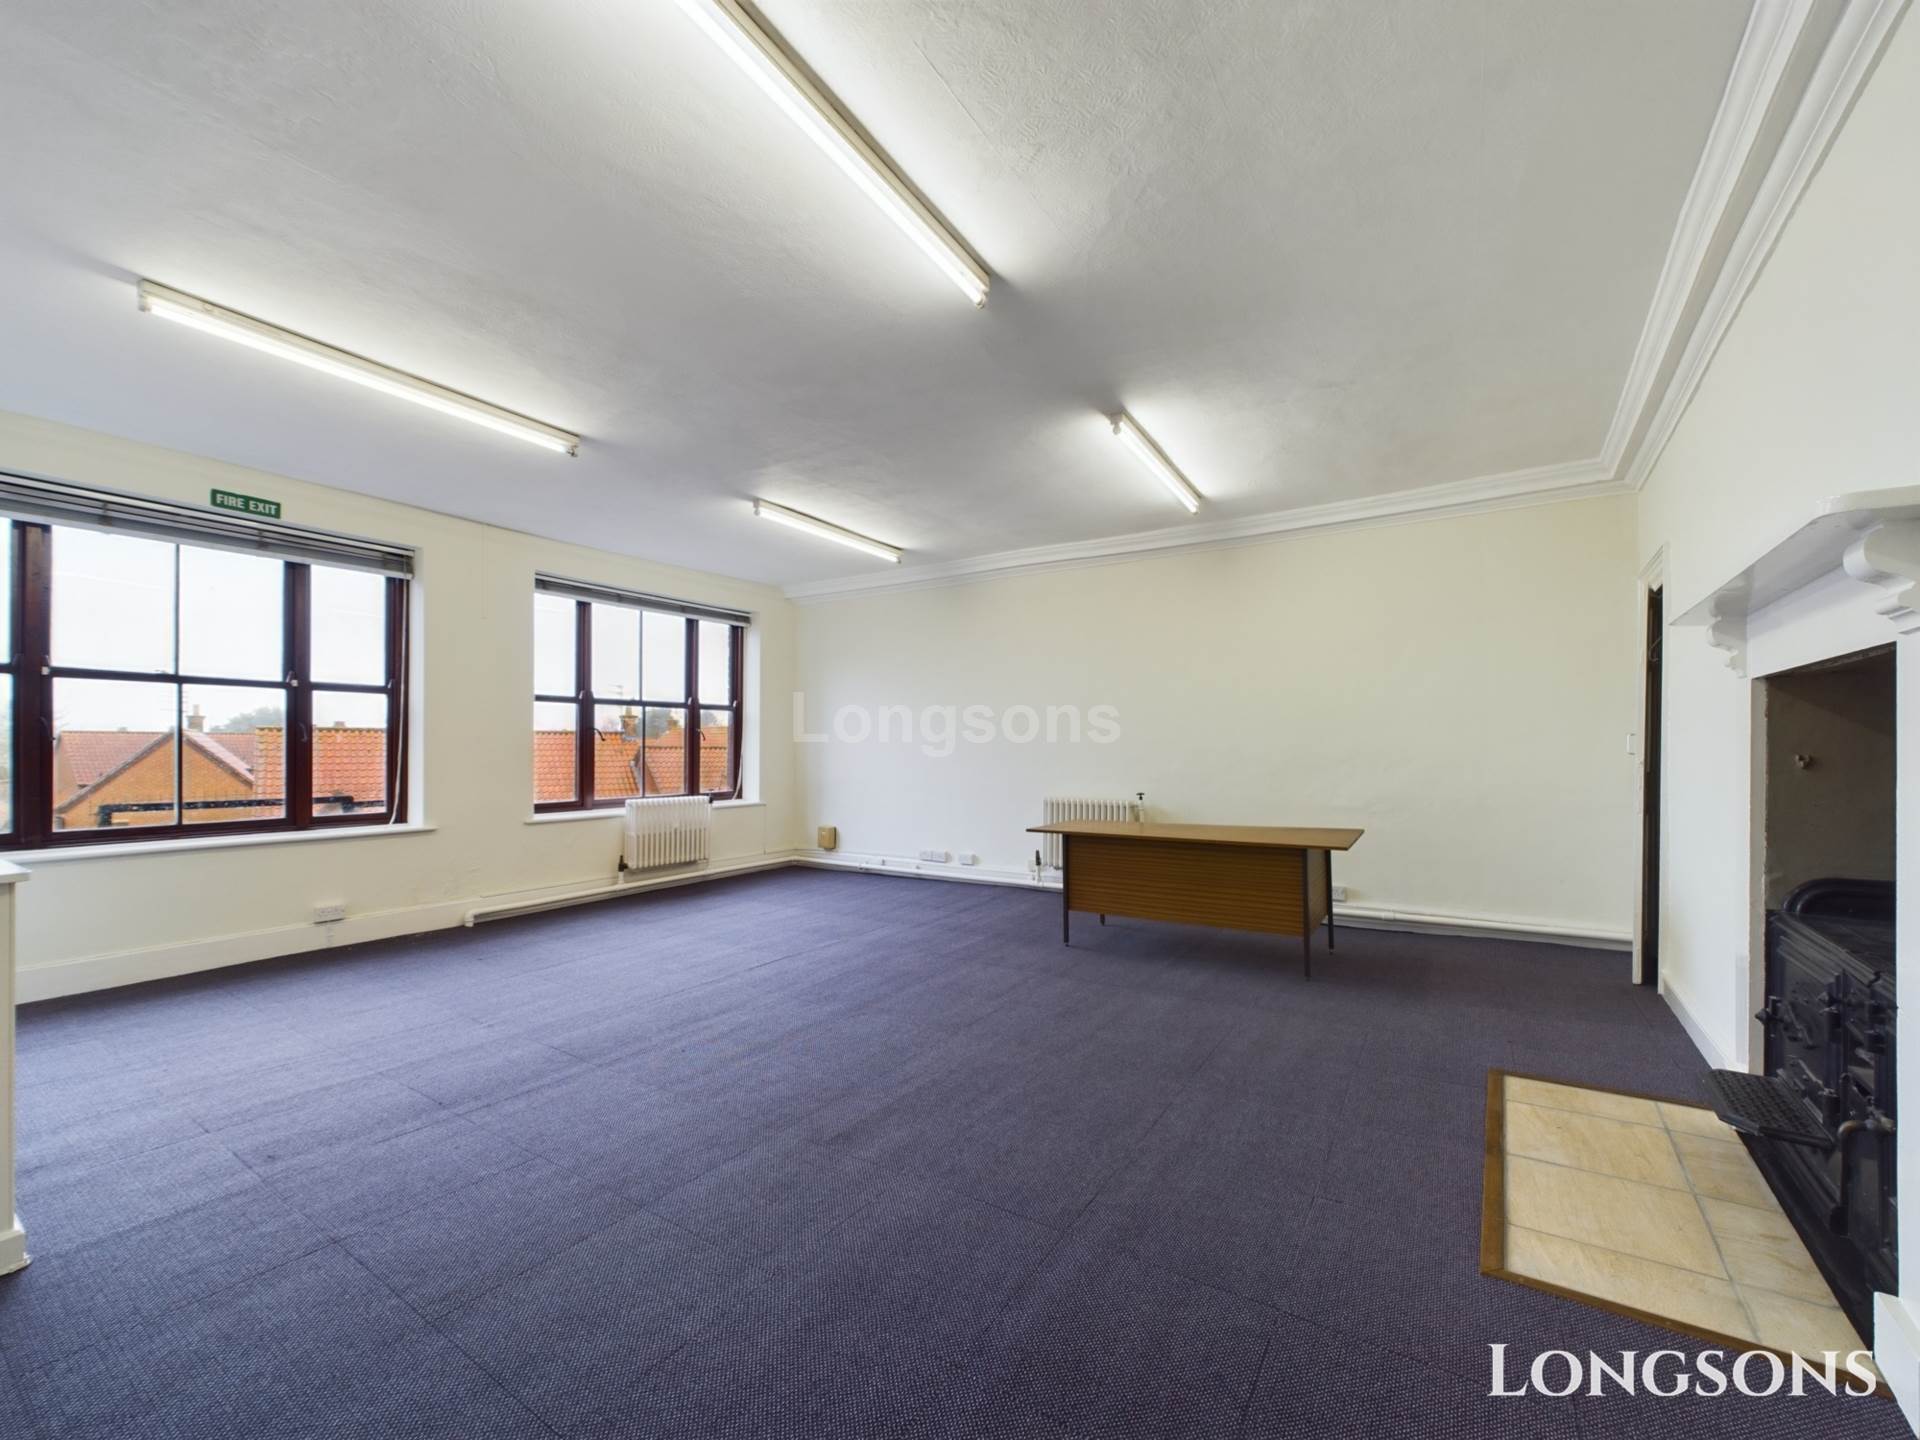 Office for rent in Swaffham. From Longsons - Swaffham